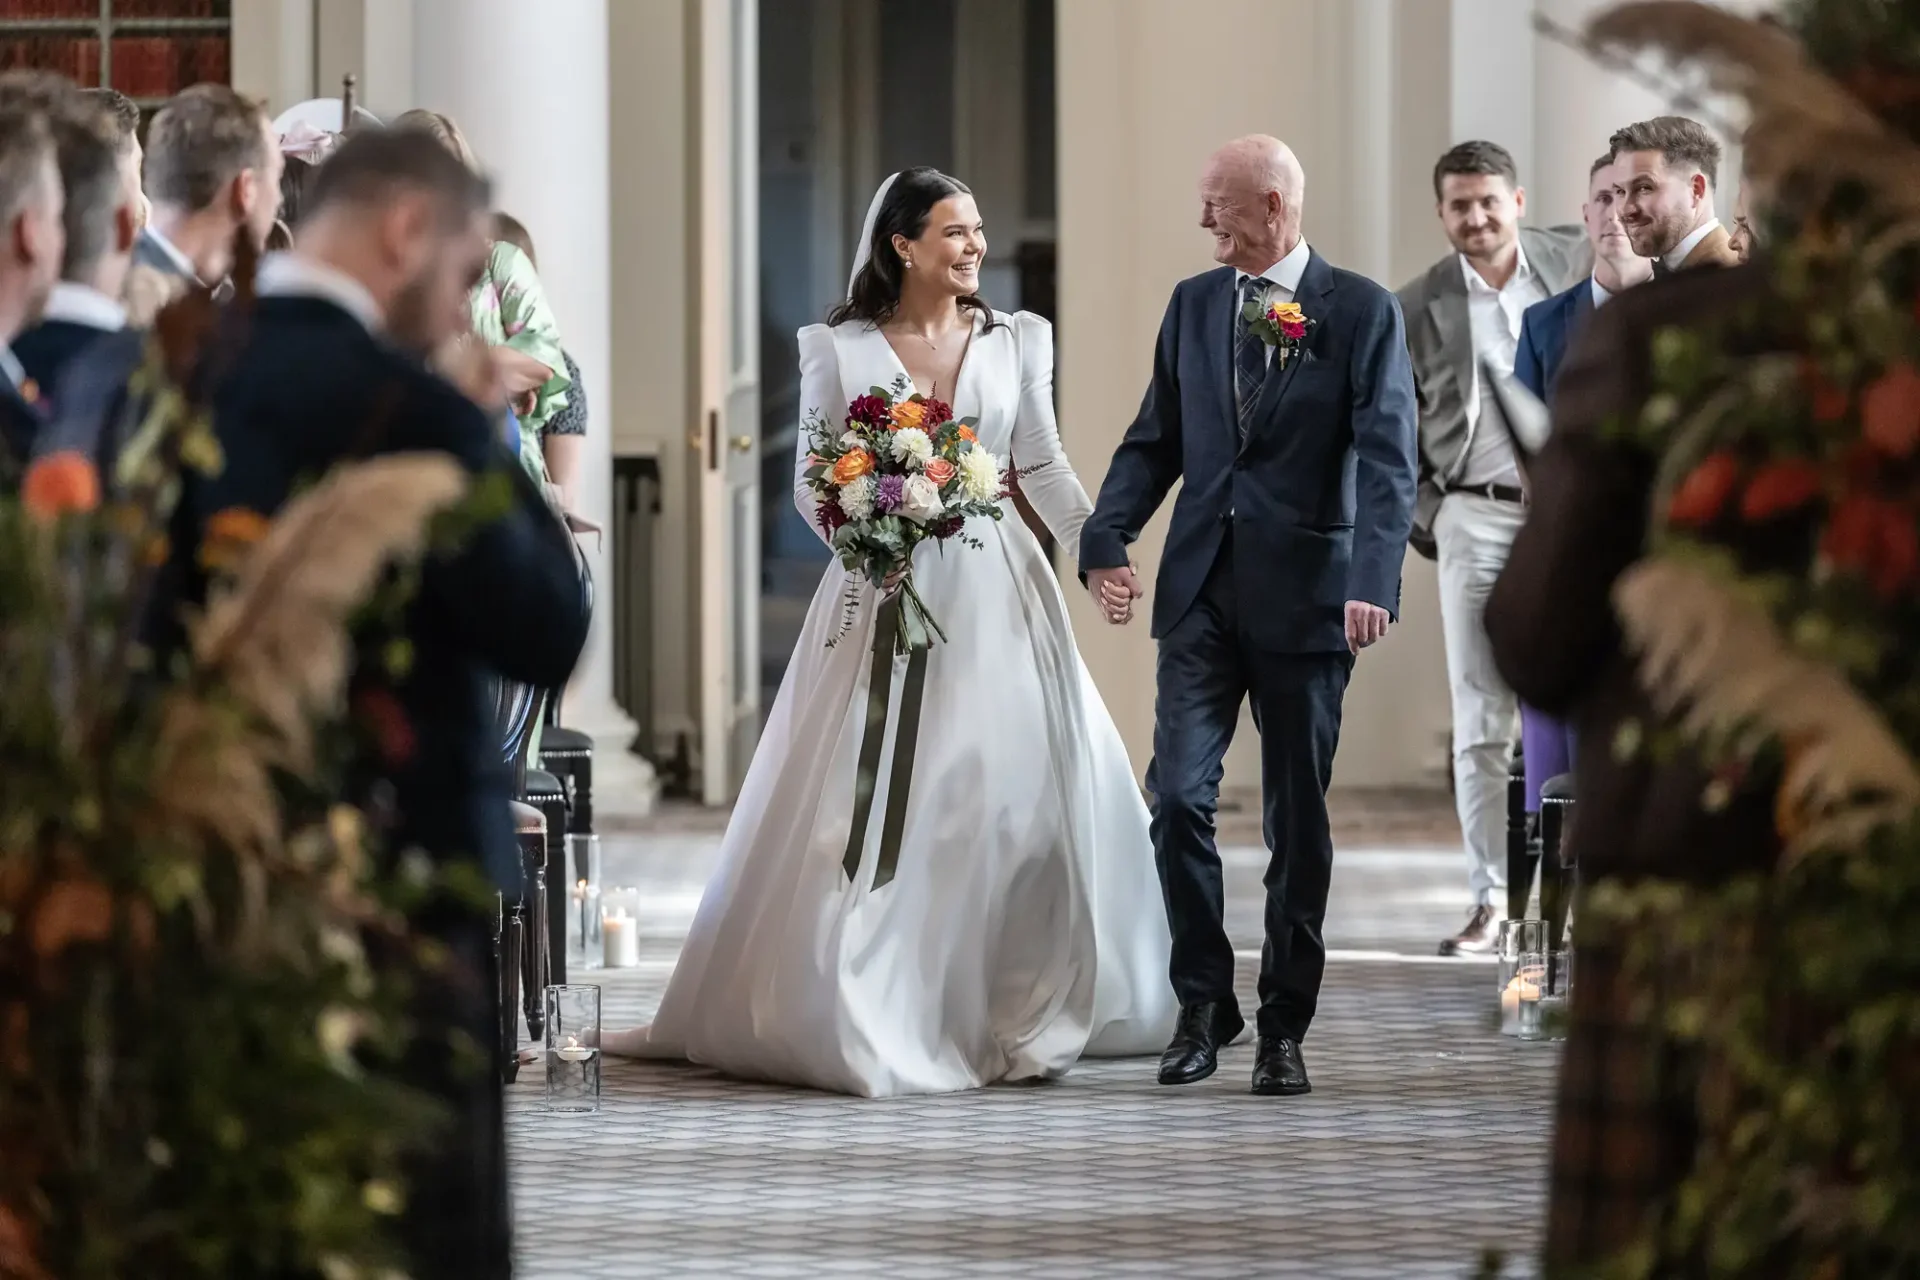 A bride in a white dress walks down the aisle smiling, escorted by an older man in a suit, with guests standing on either side.